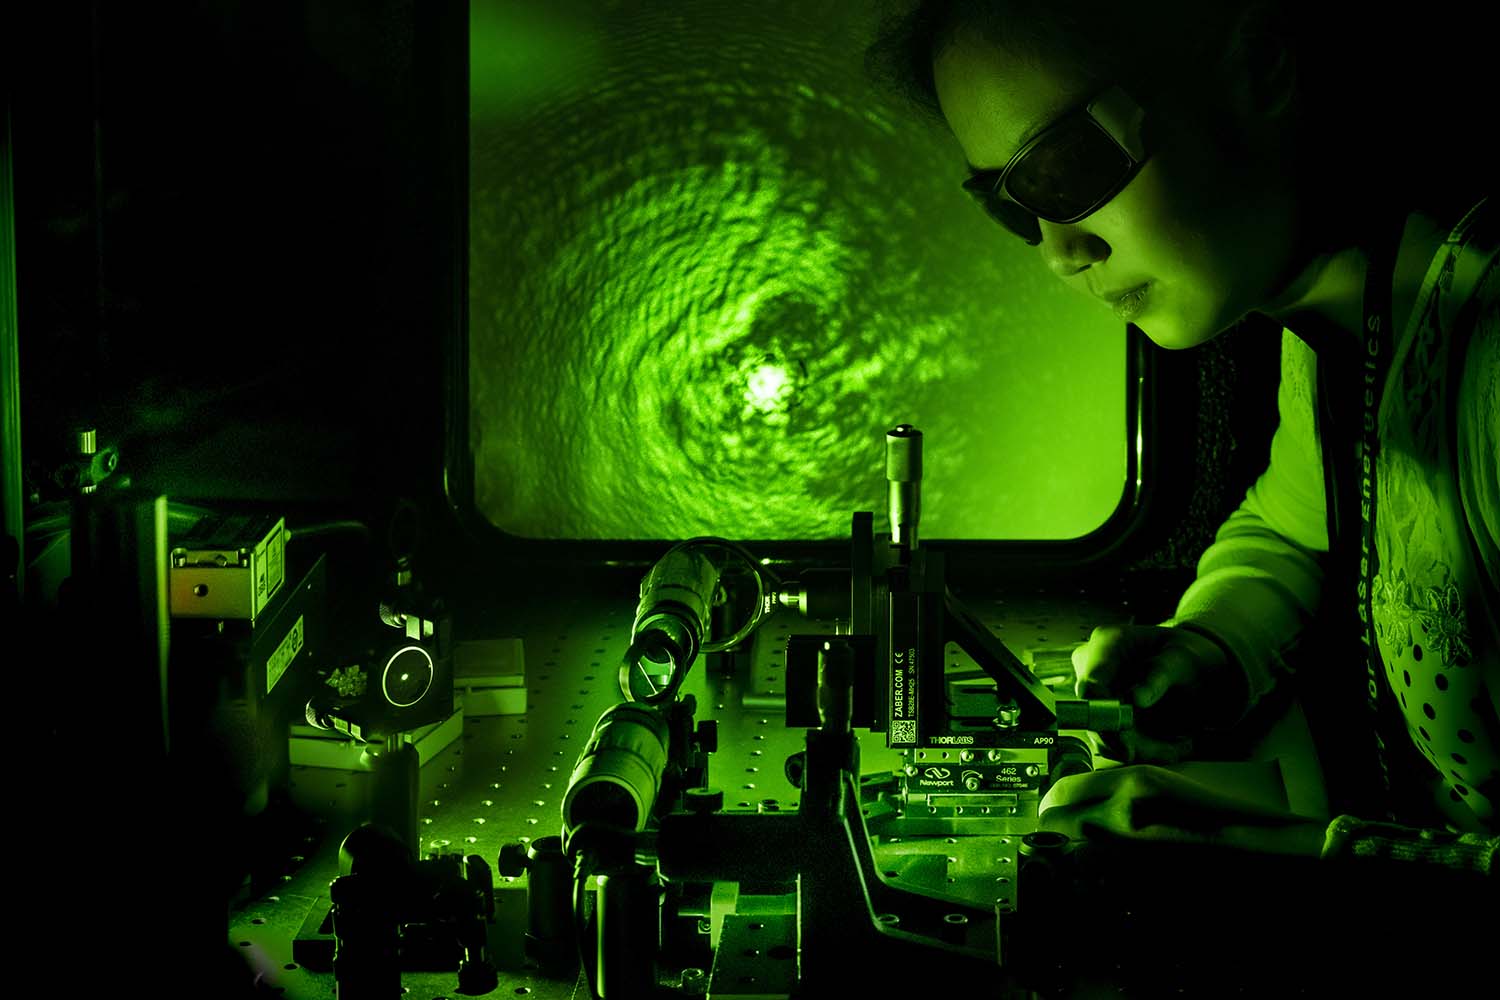 Using a green laser to investigate the Raman scattering spectra of materials with laser-induced damage.